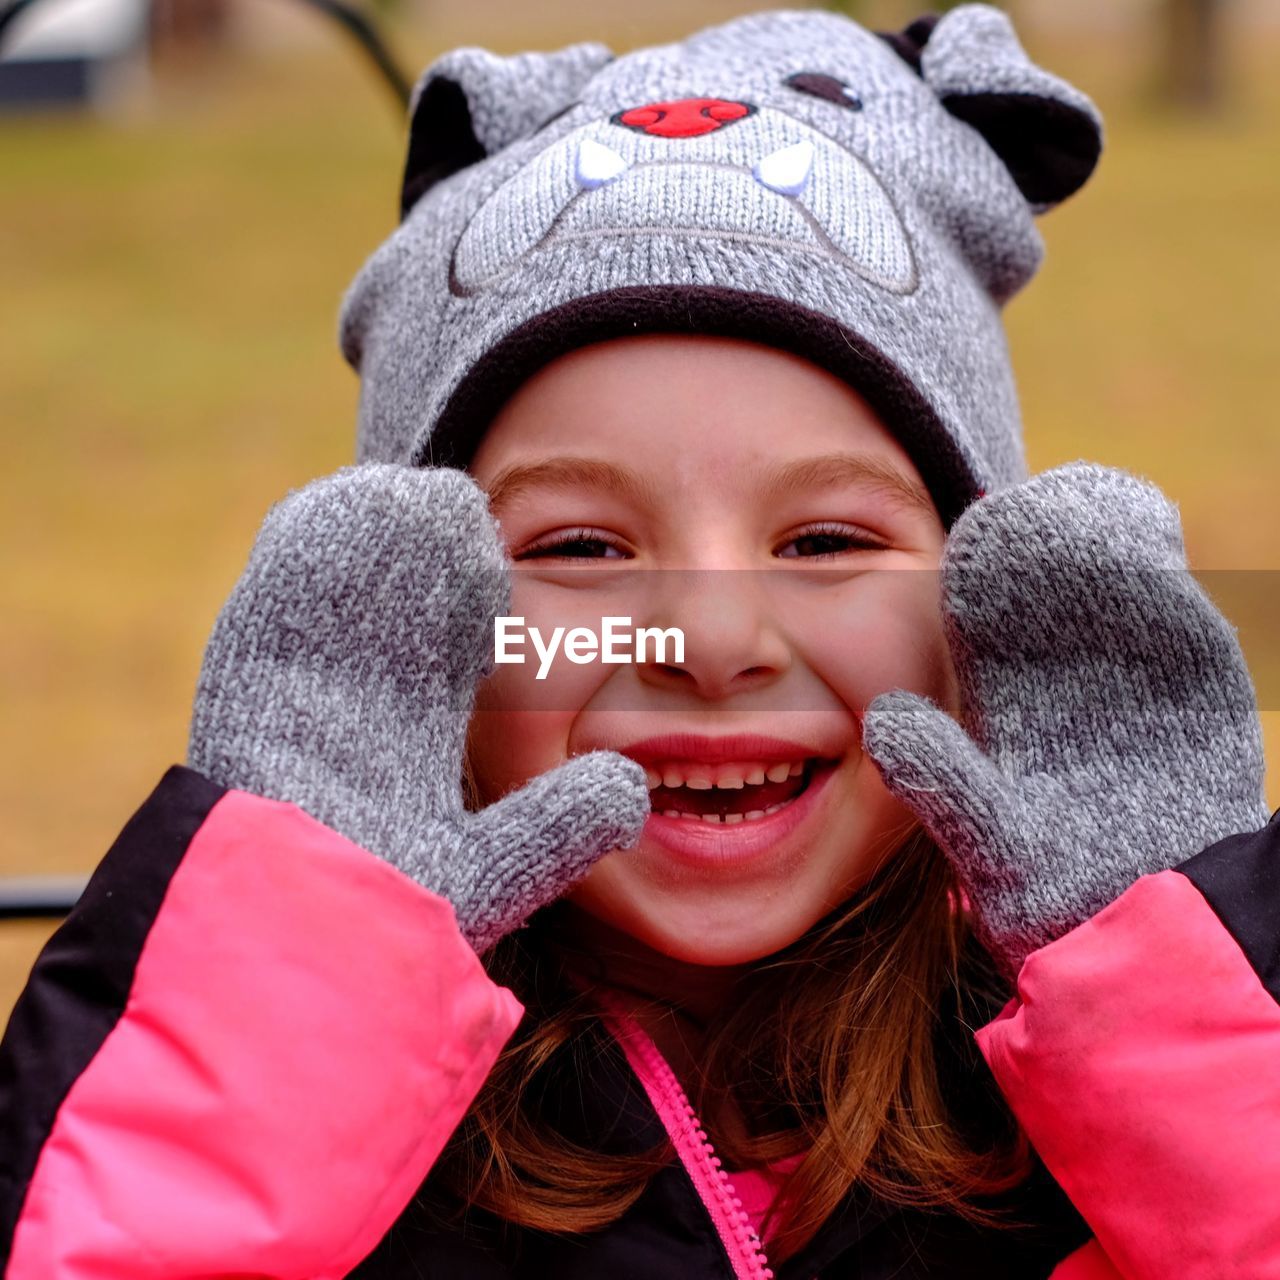 Close-up portrait of smiling girl wearing knit hat and gloves